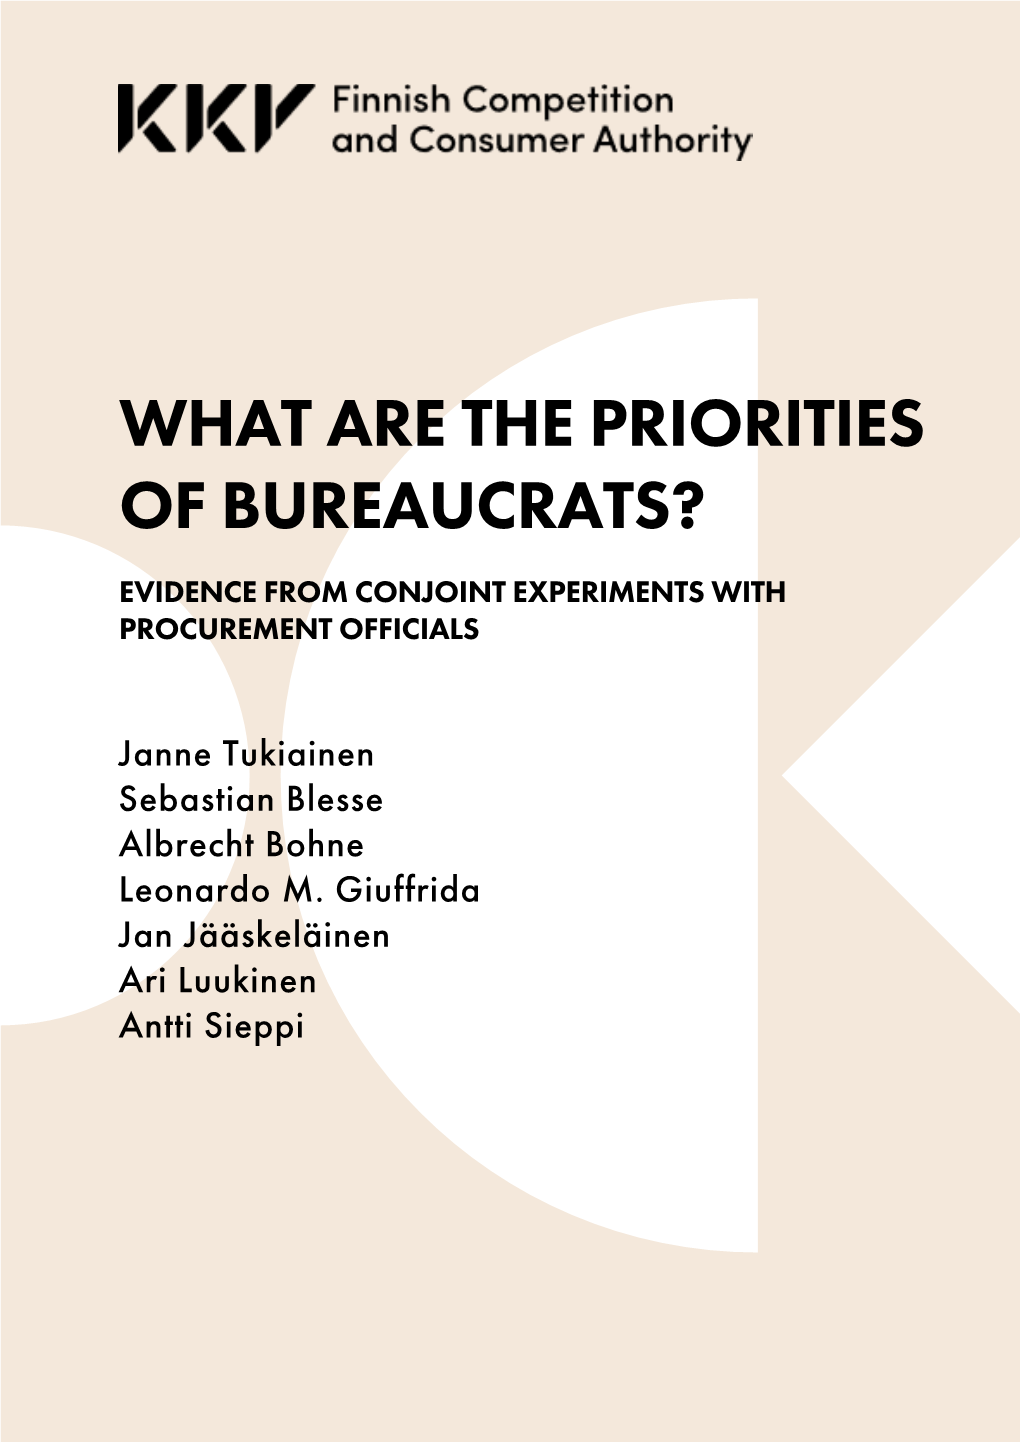 What Are the Priorities of Bureaucrats?